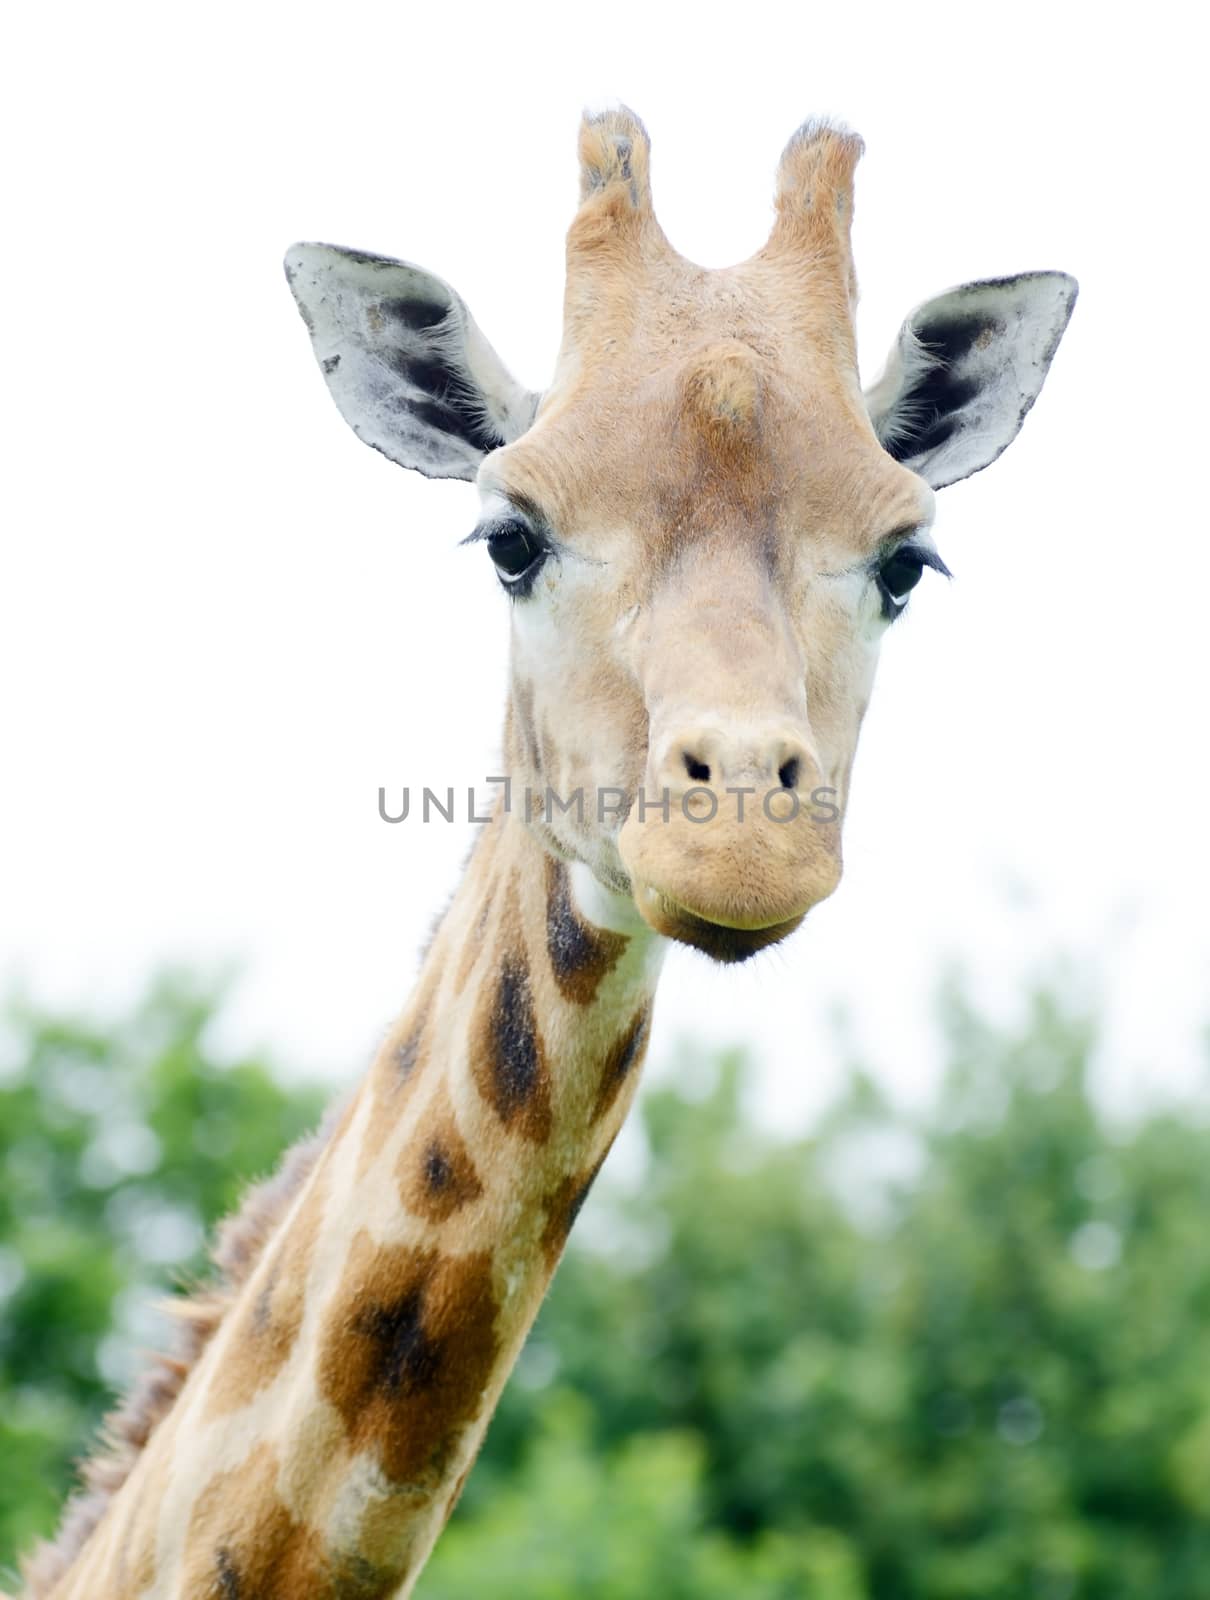 Giraffe closeup showing head and neck detail. Ears and horns prominant.